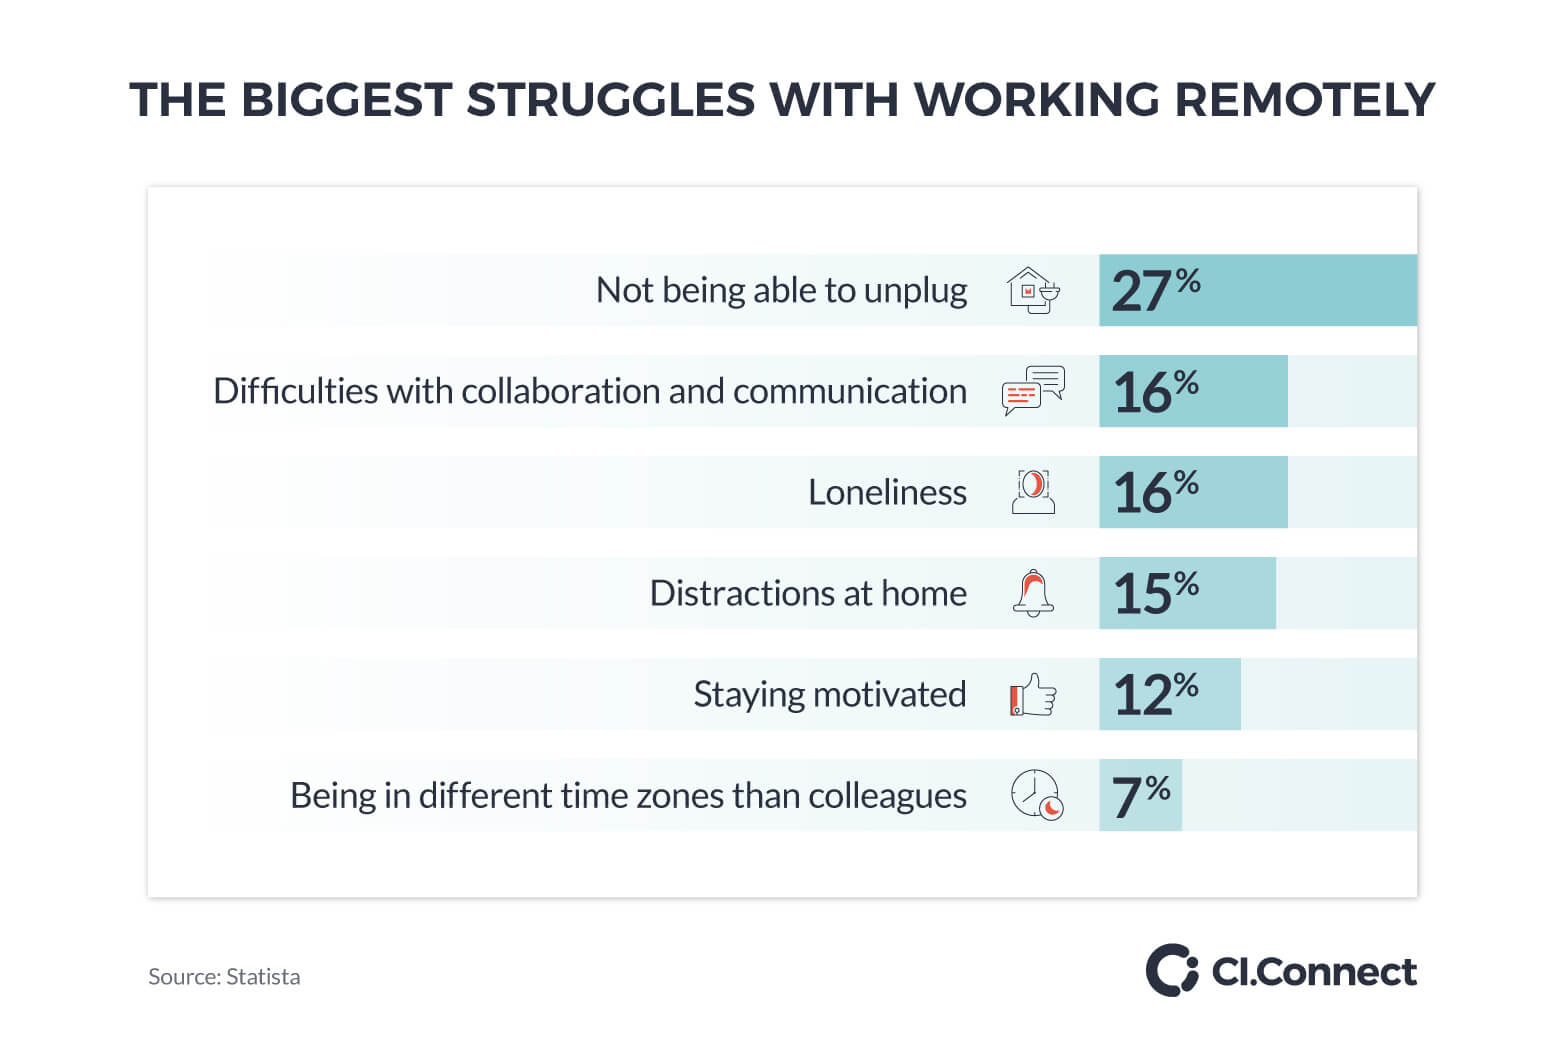 The biggest struggles with working remotely